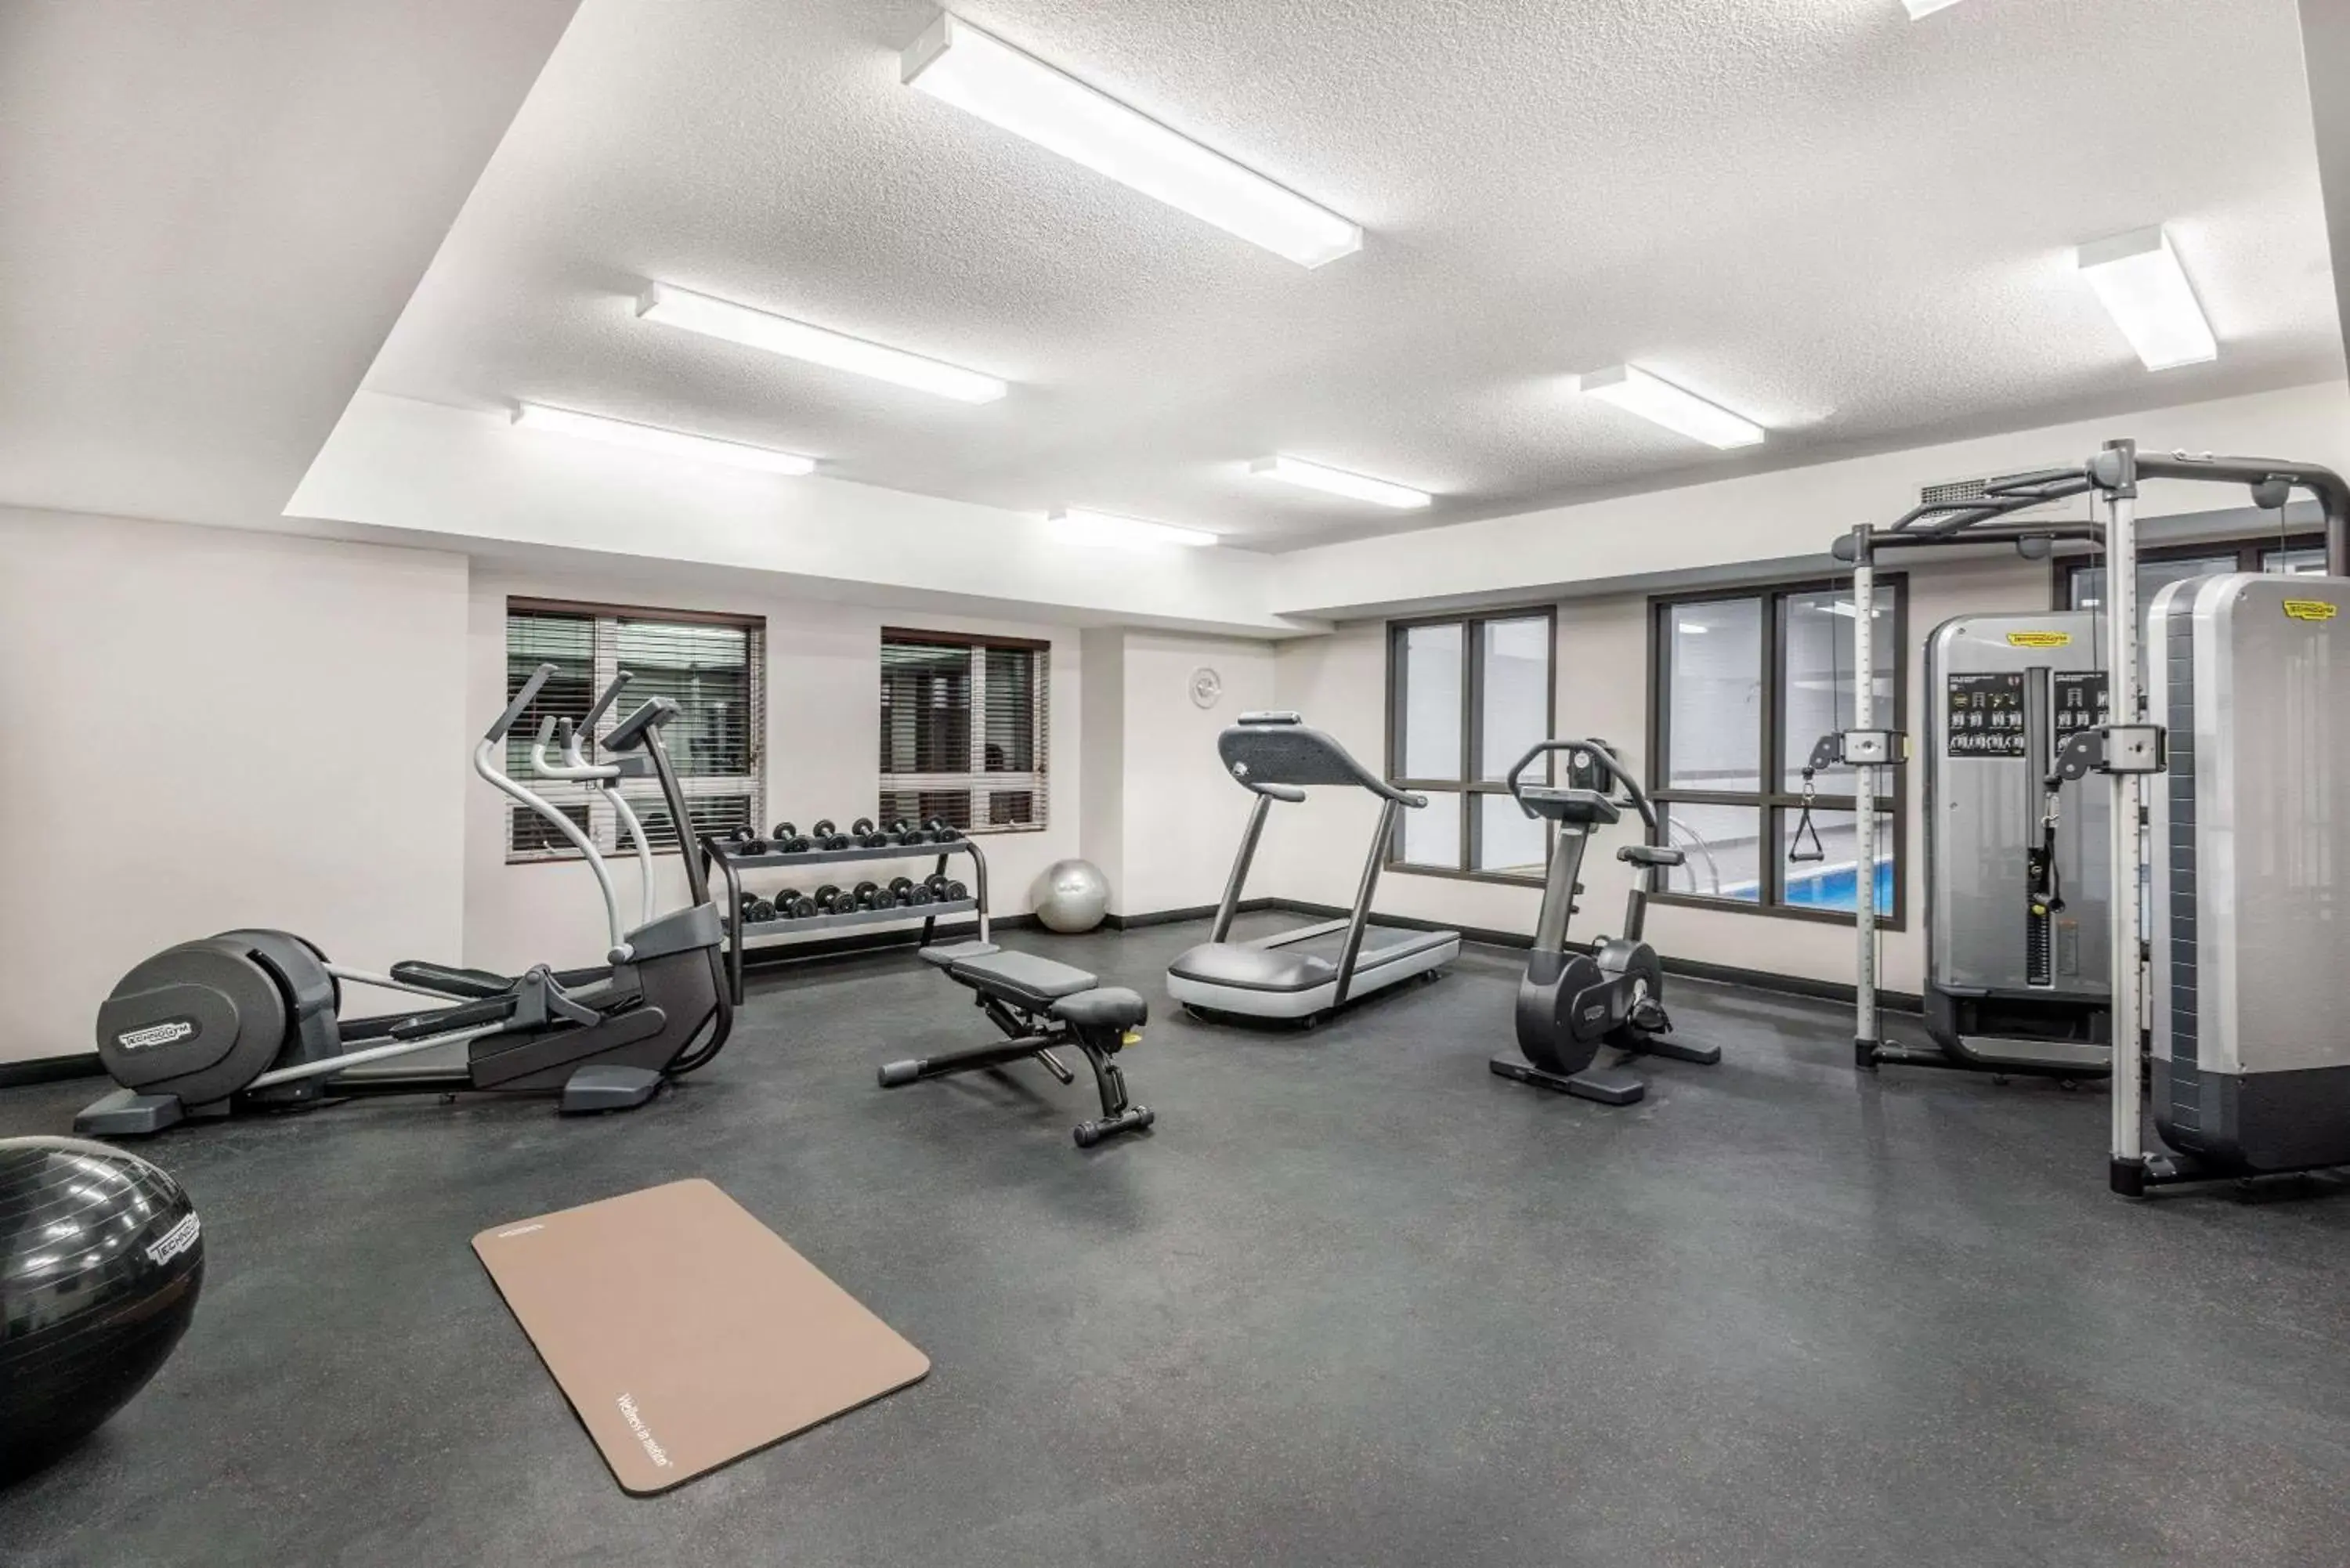 Fitness centre/facilities, Fitness Center/Facilities in Microtel Inn & Suites by Wyndham Sudbury